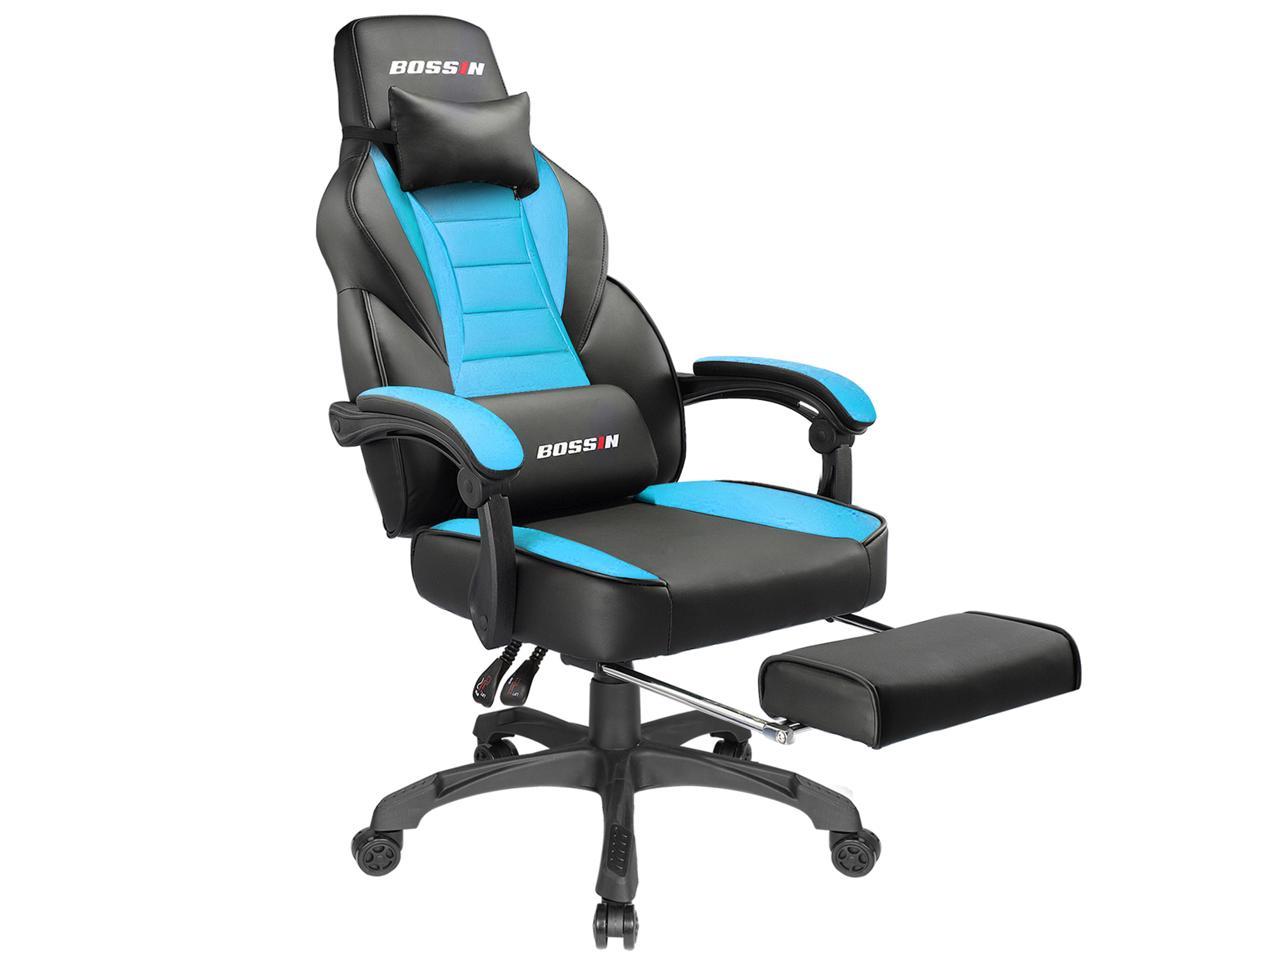 Bossin Racing Style Gaming Chair Computer Desk Chair With Footrest And Headrest Ergonomic Design Large Size High Back E Sports Chair Pu Leather Swivel Office Chair Tiffany Blue Newegg Com